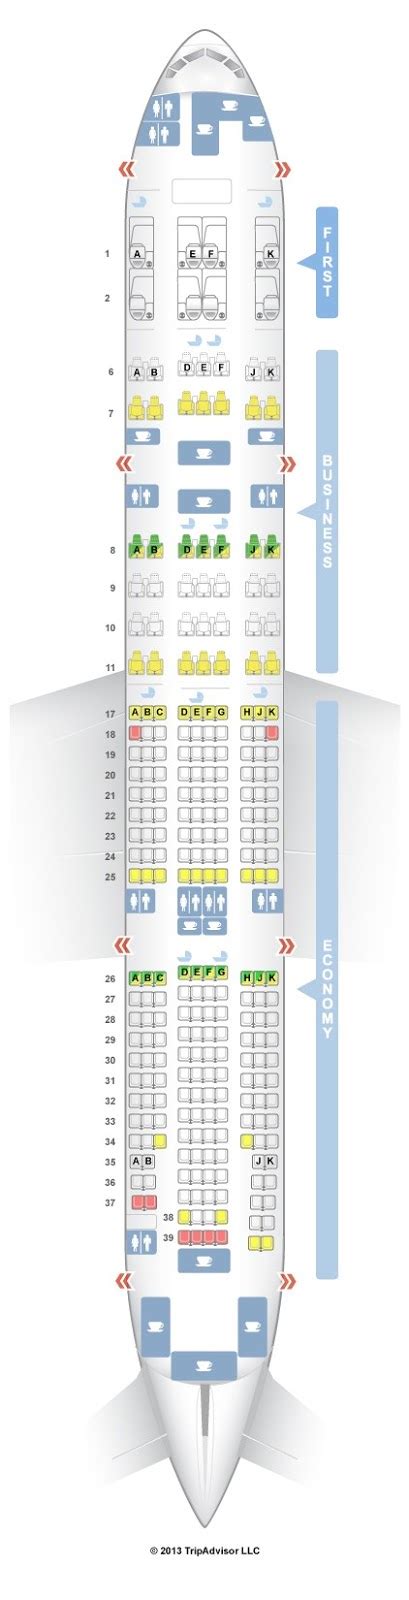 Boeing Seating Chart 777